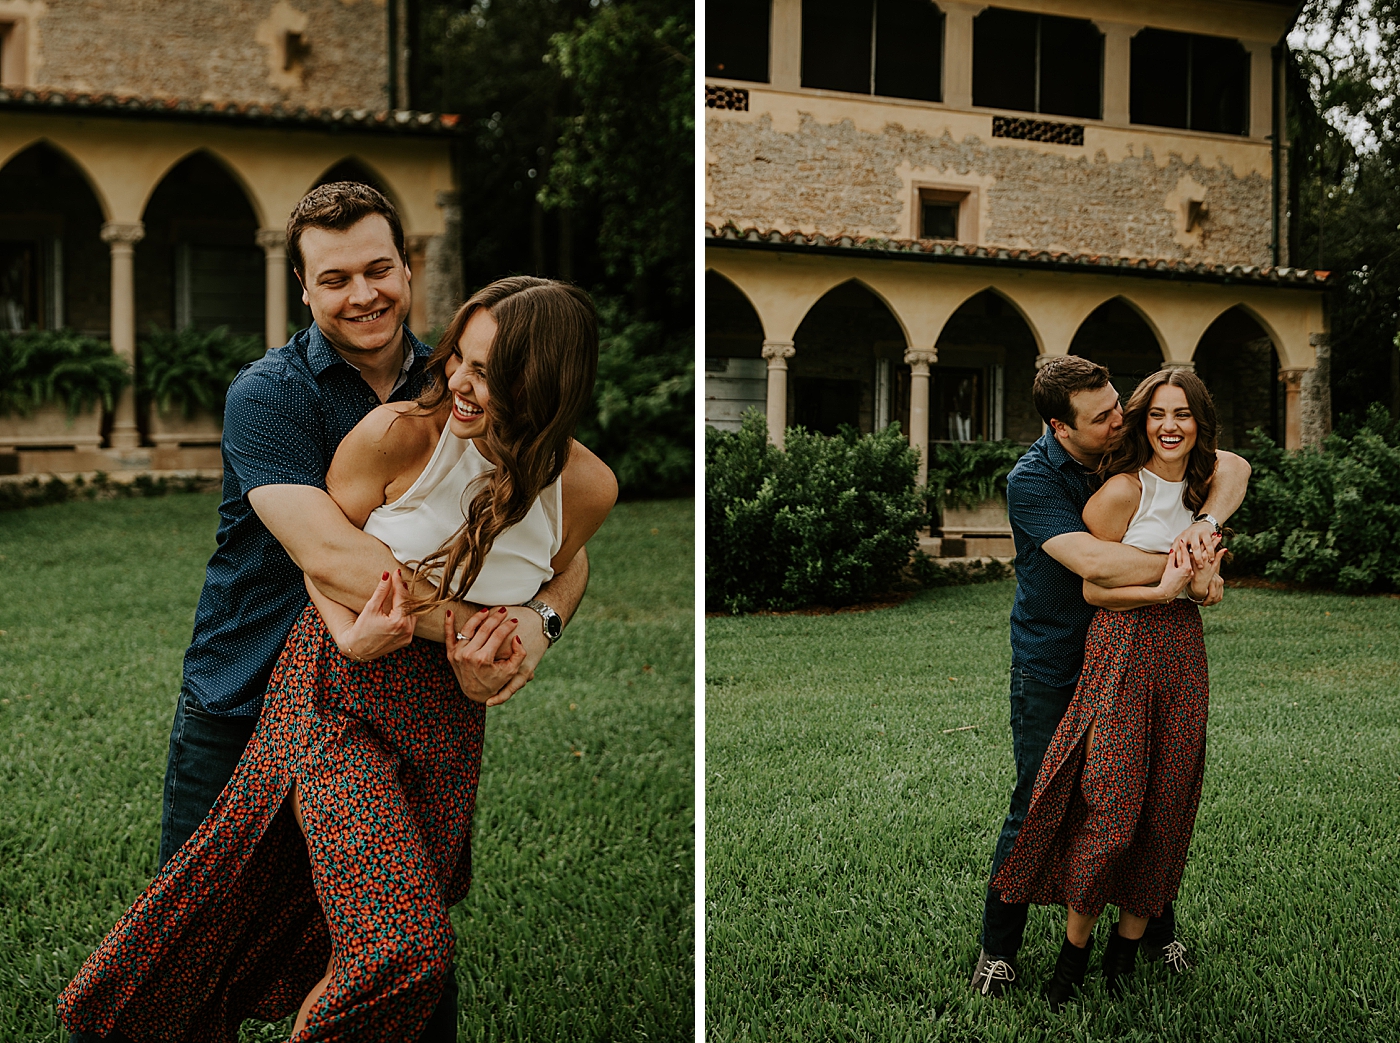 Man holding woman on green grass backyard Deering Estate Engagement Photography captured by Maggie Alvarez Photography